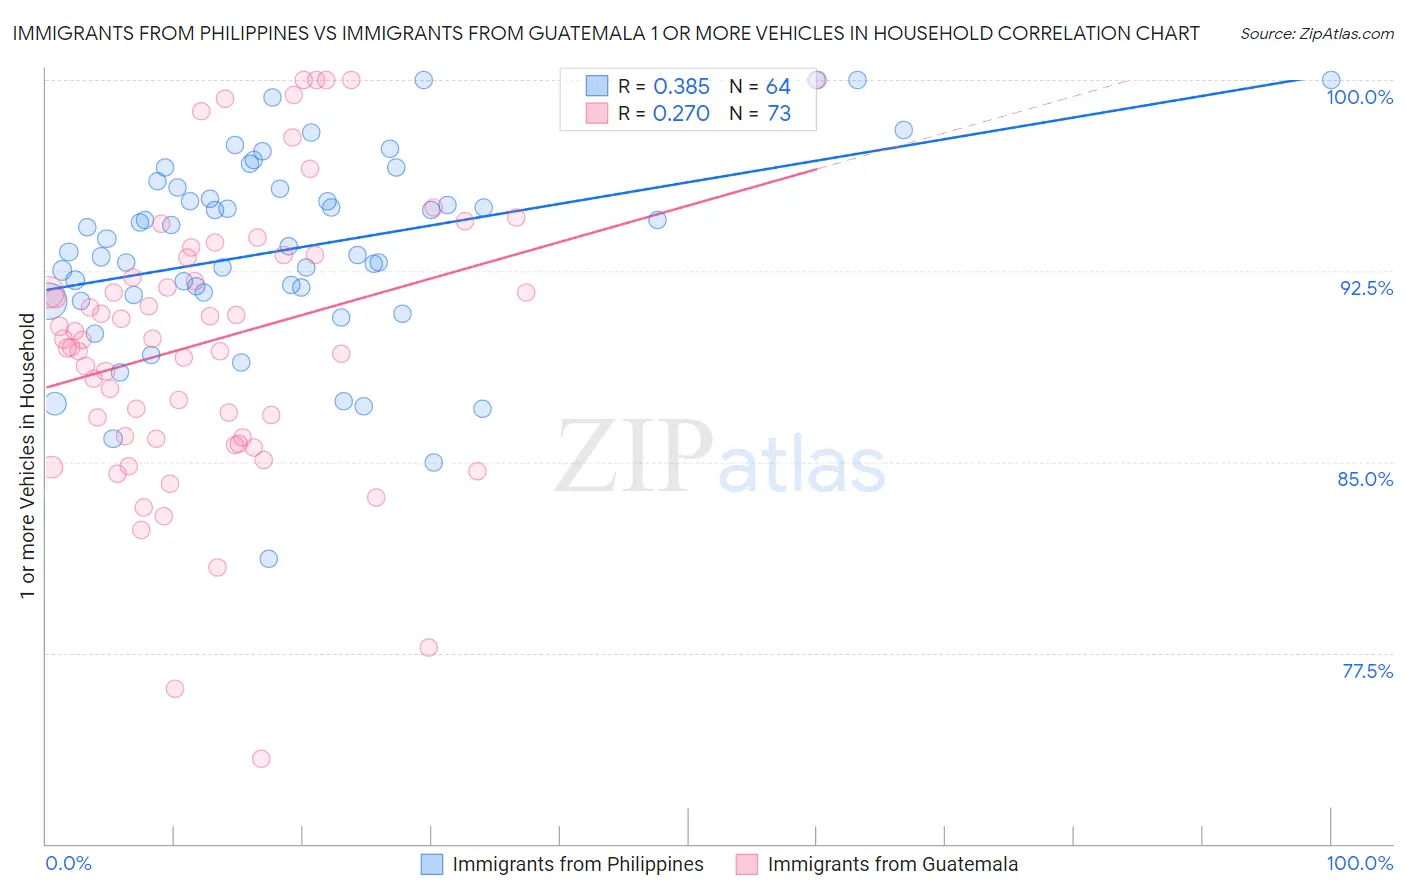 Immigrants from Philippines vs Immigrants from Guatemala 1 or more Vehicles in Household